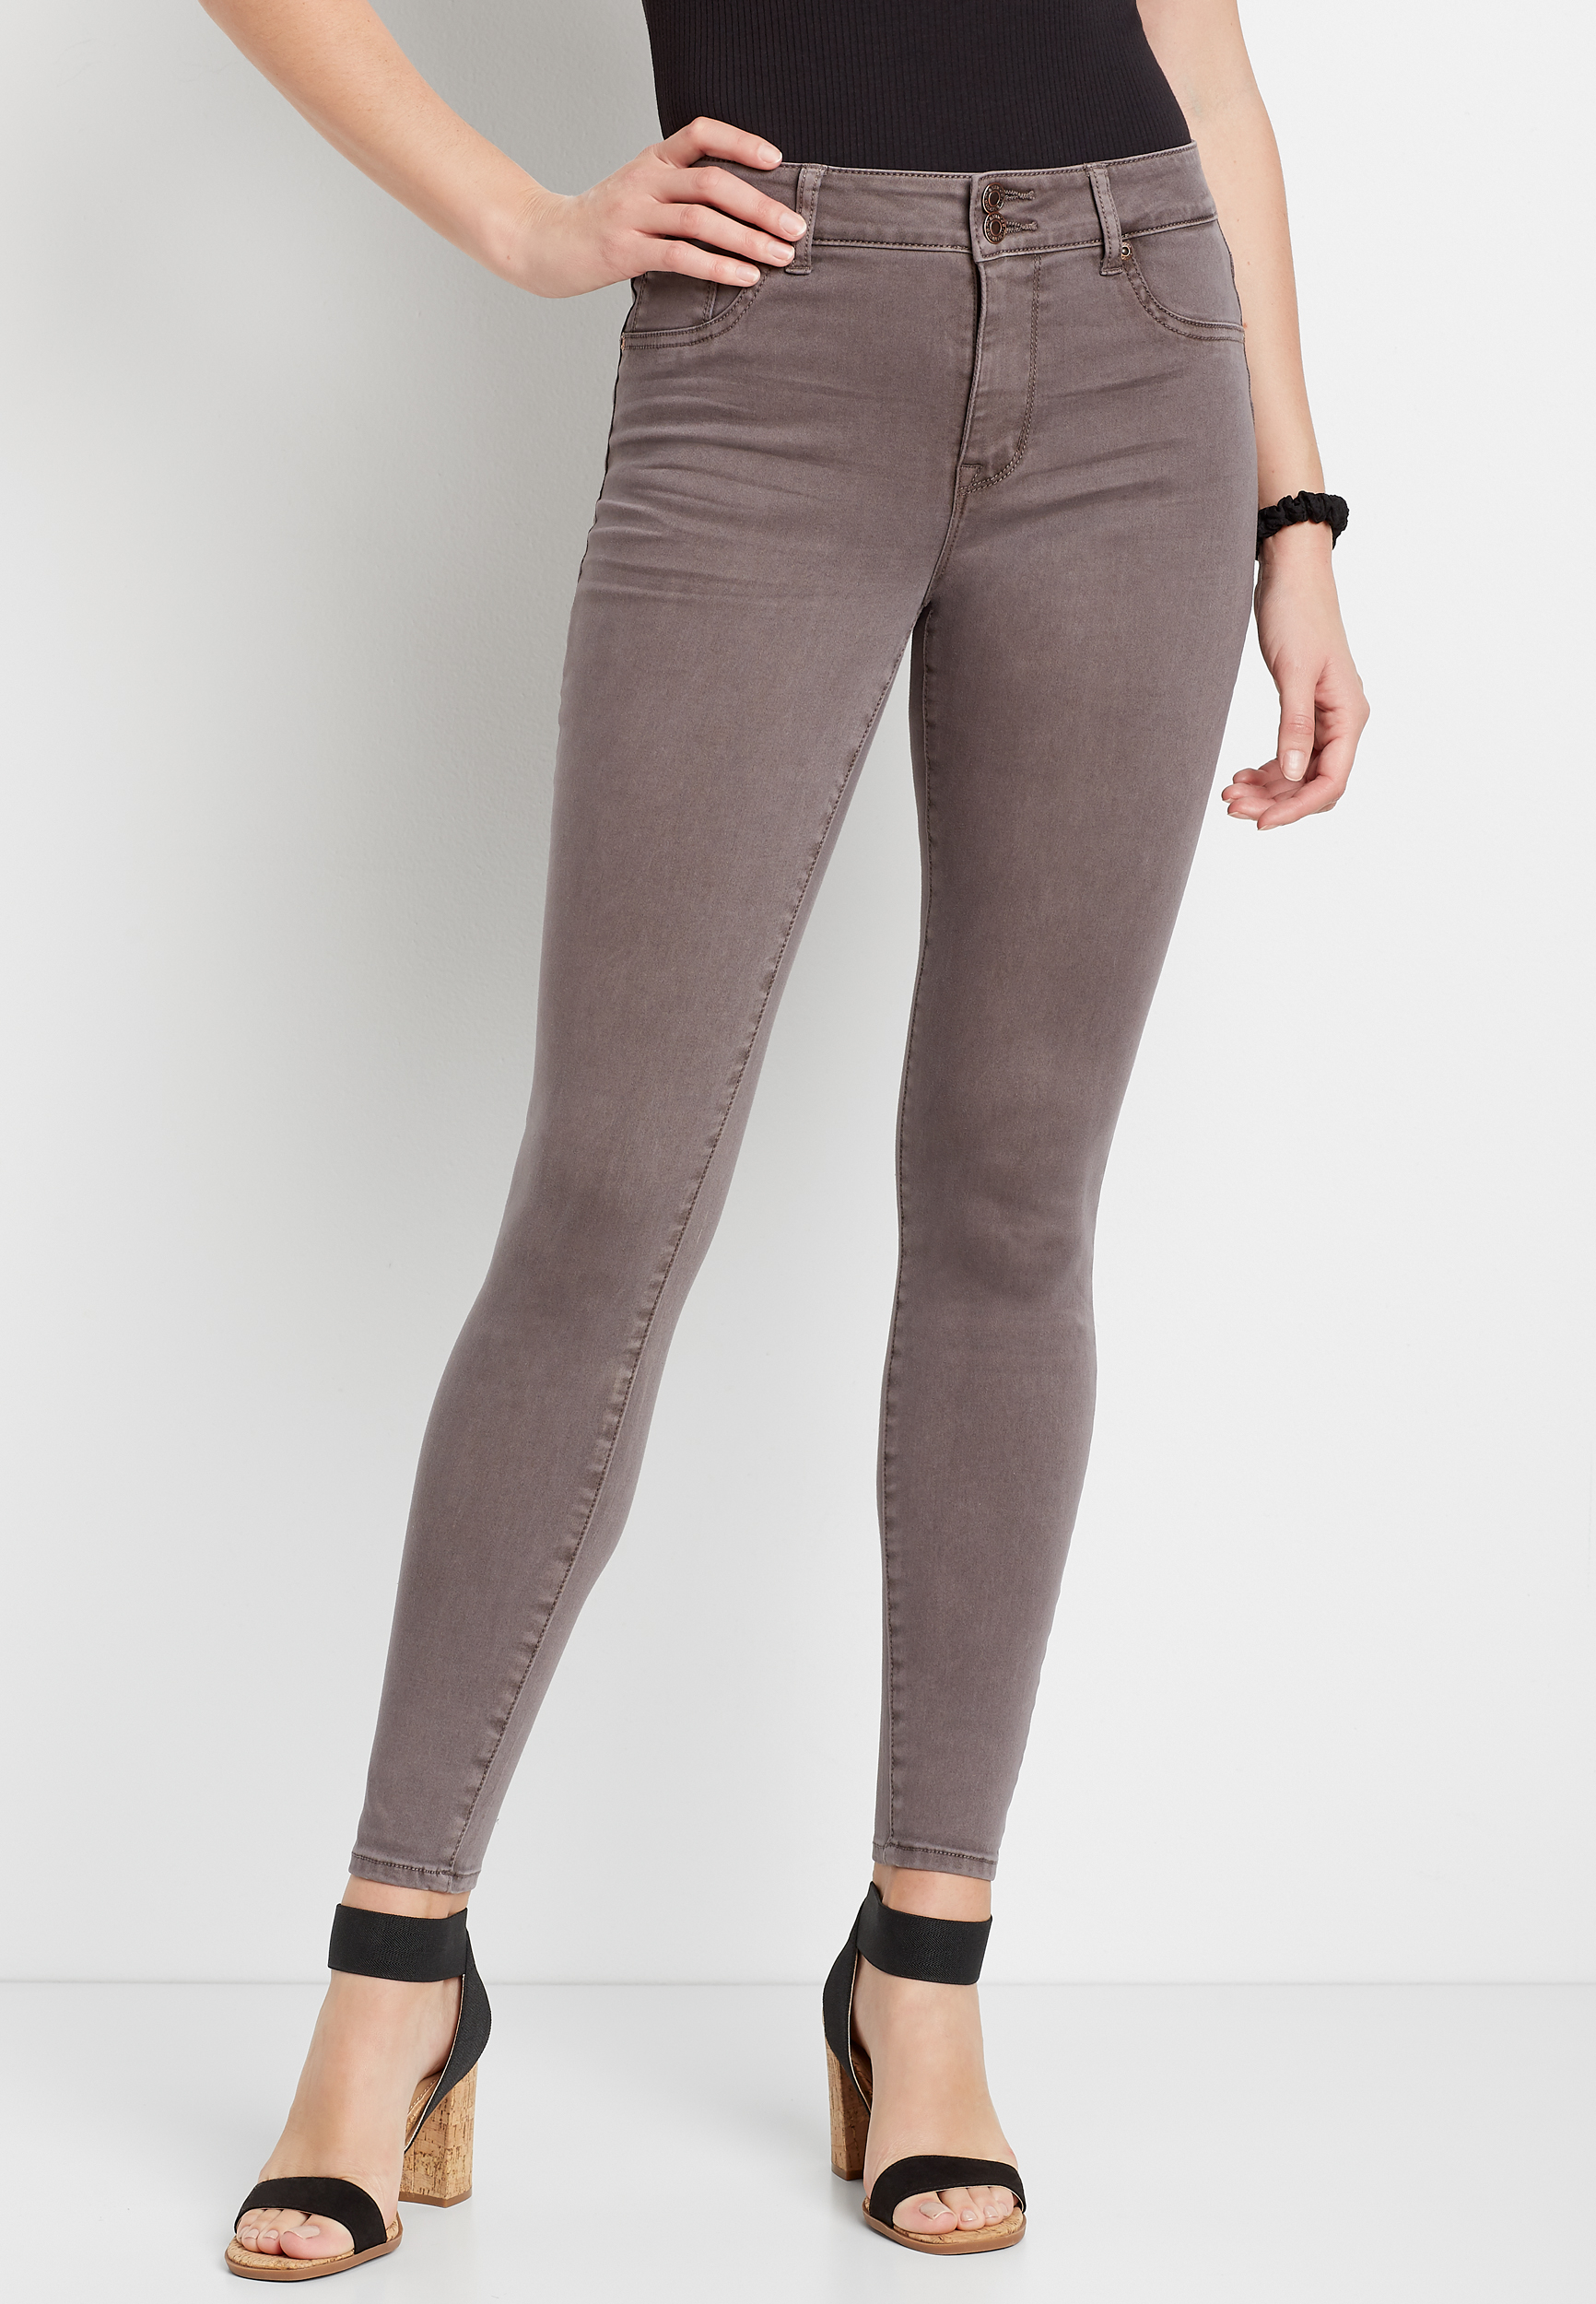 m jeans by mauricesâ¢ High Rise Brown Double Button Jegging Made With REPREVEÂ® | maurices